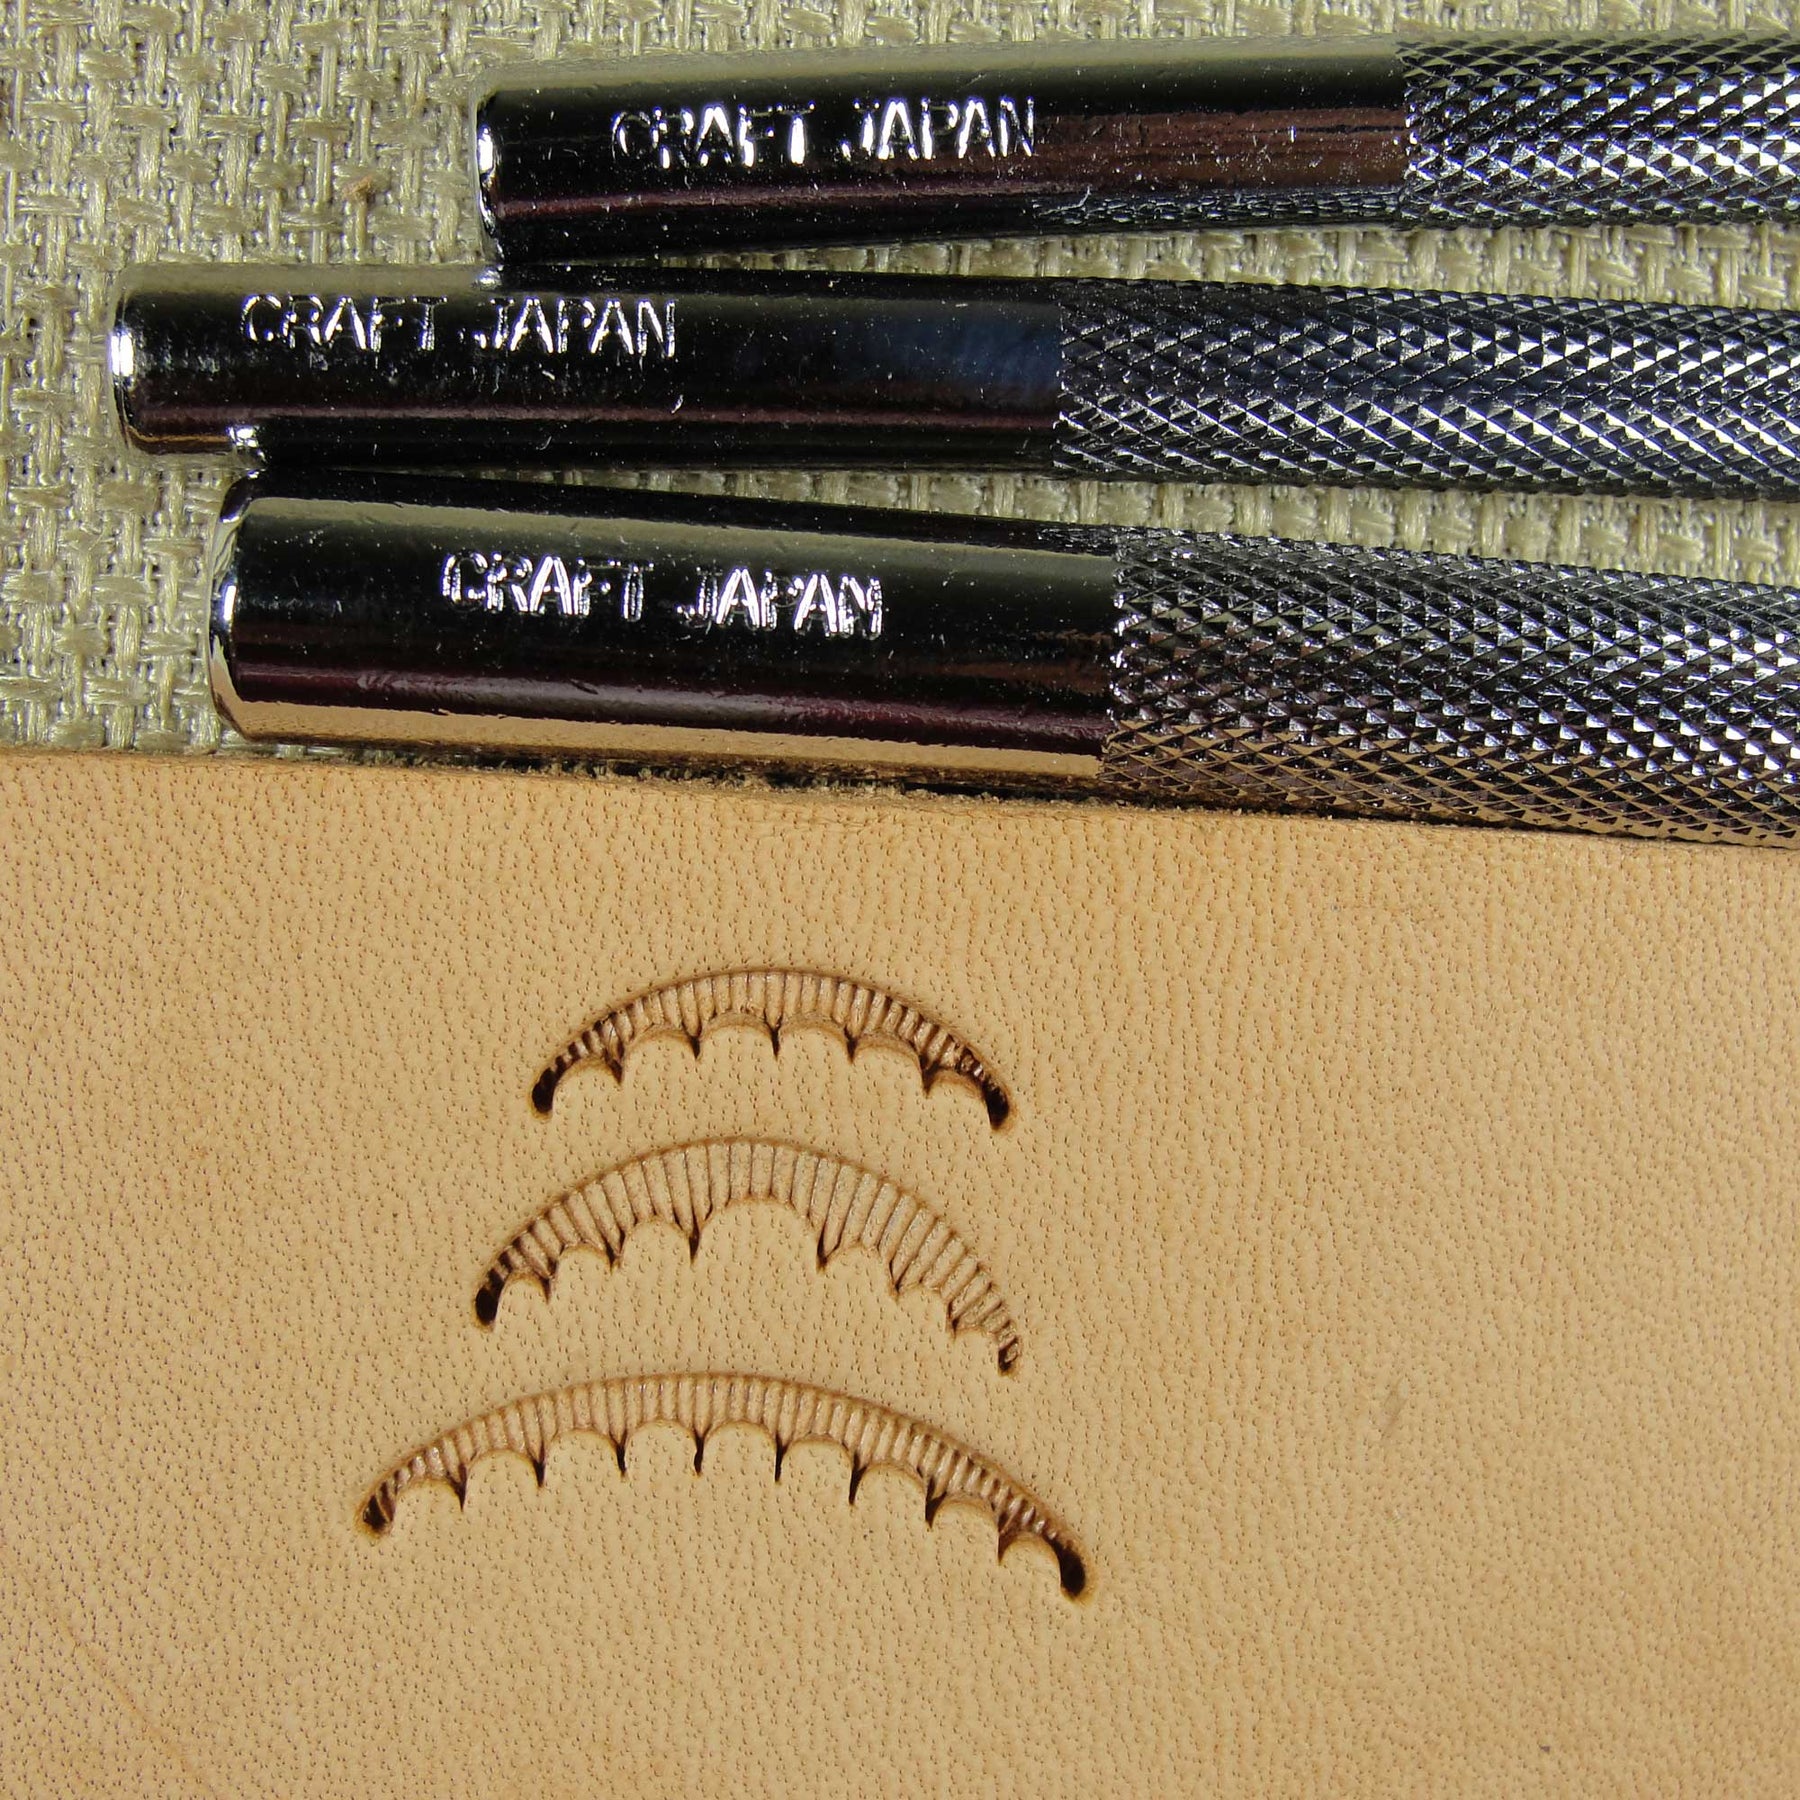 Craft Japan - Playing Card Suit Stamps (4-Piece Set, Leather Stamping Tools)